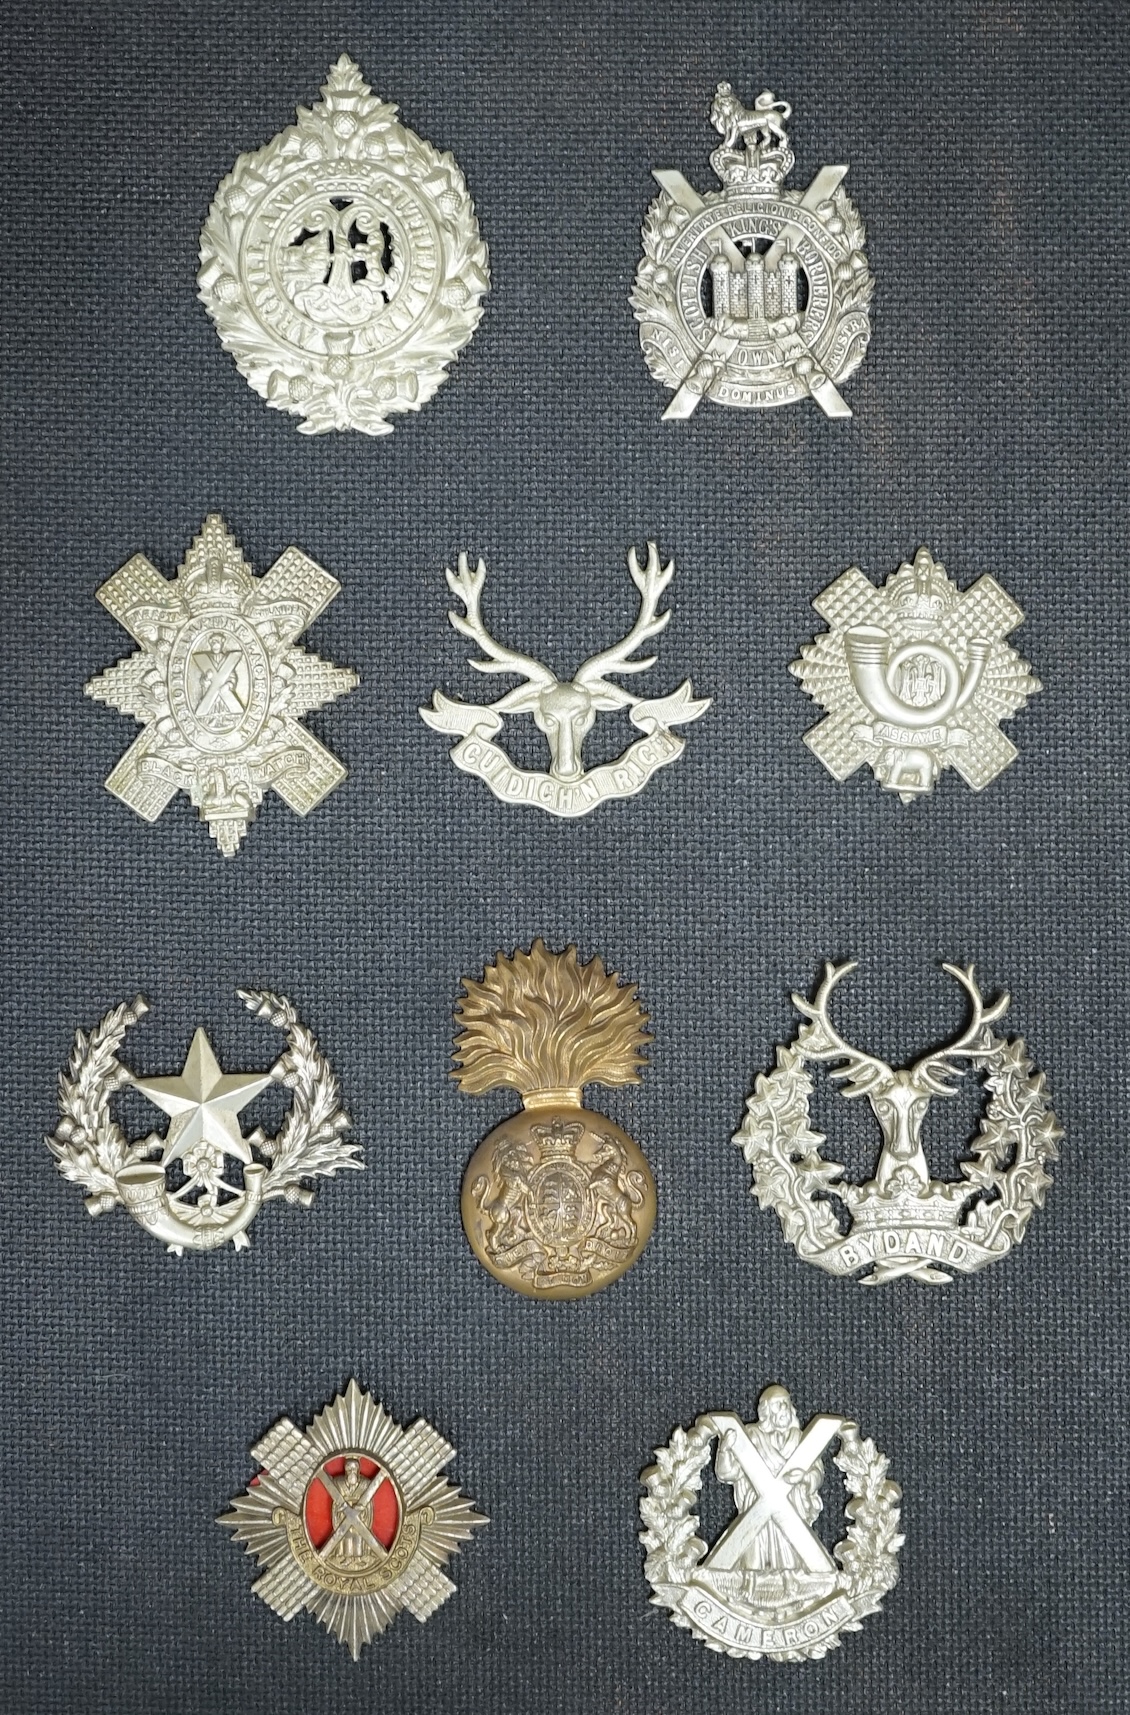 Ten military cap and Glengarry badges mounted on a board including; The King’s Own Scottish Borderers, the Argyle and Sutherland Regiment, the Royal Scots, the Gordon Highlanders, The Queen’s Own Cameron Highlanders, etc